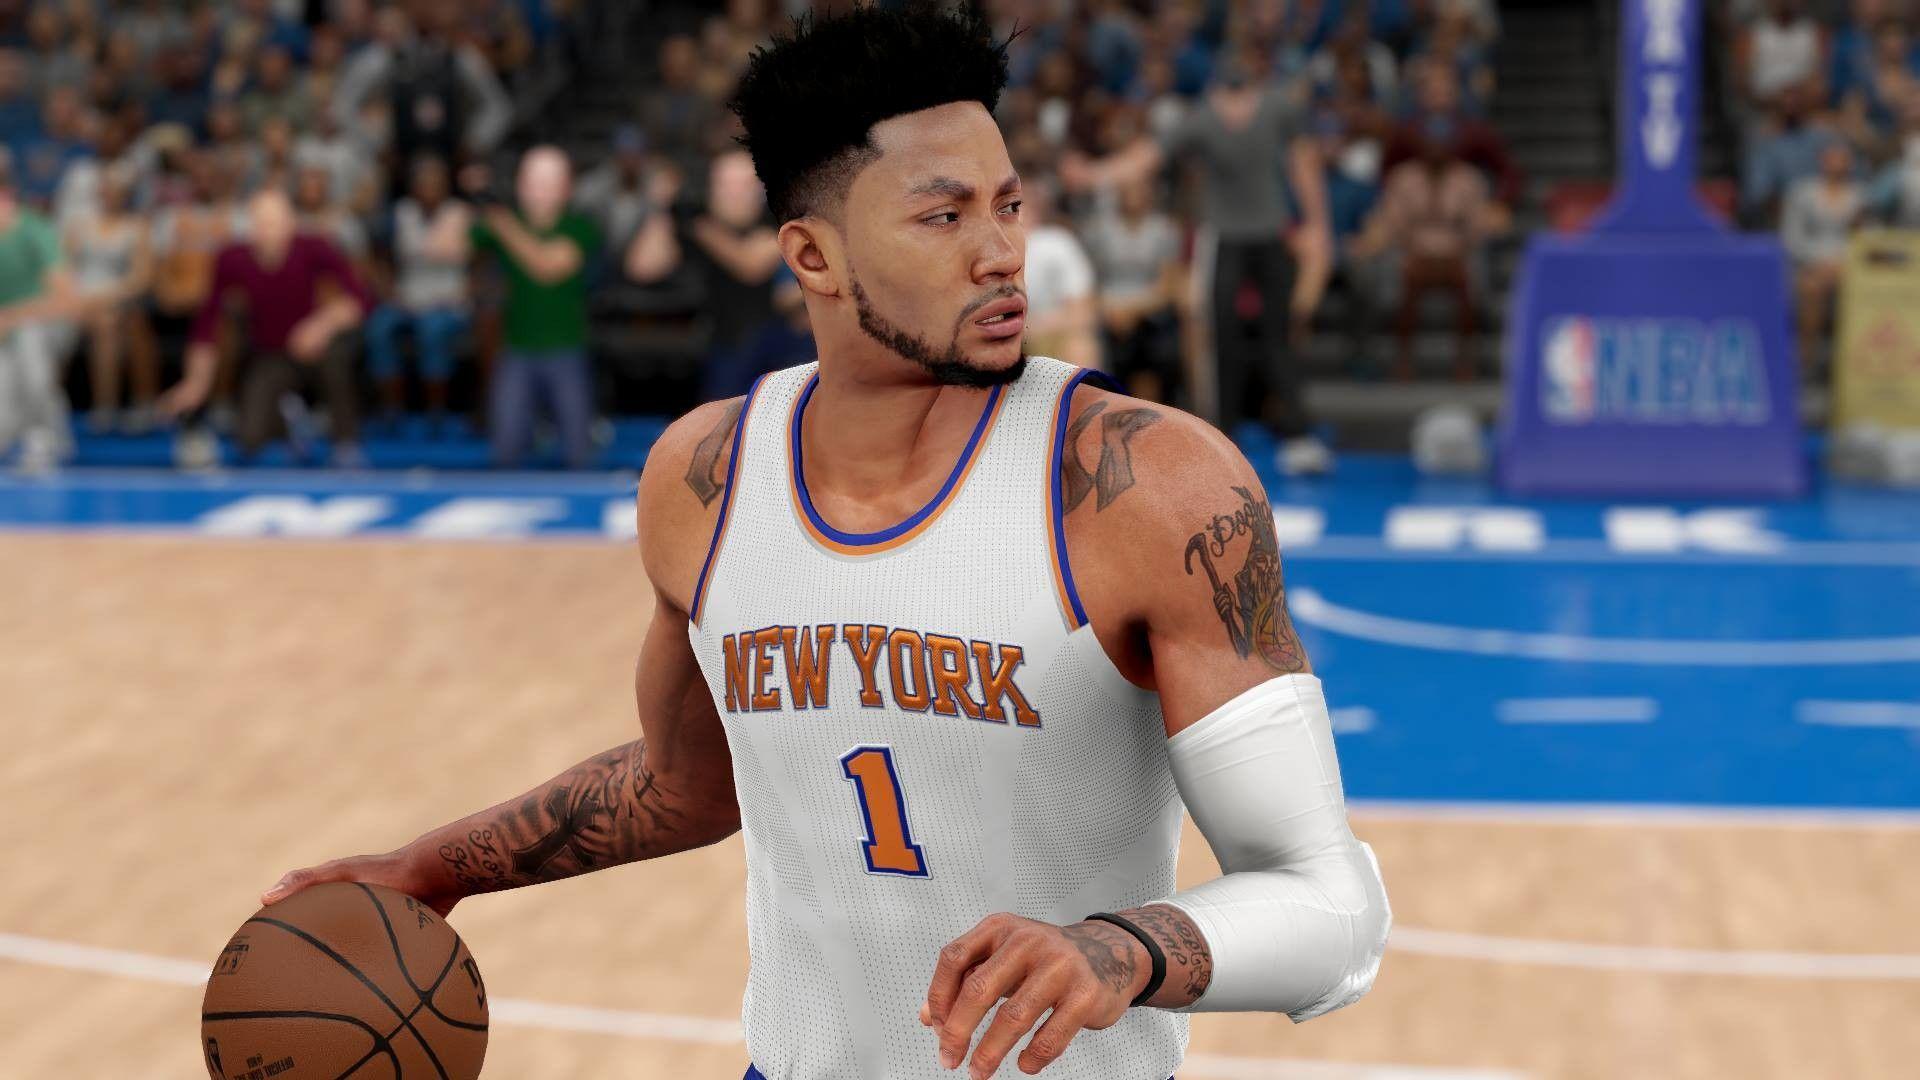 Derrick Rose Traded to the Knicks in a Blockbuster Deal